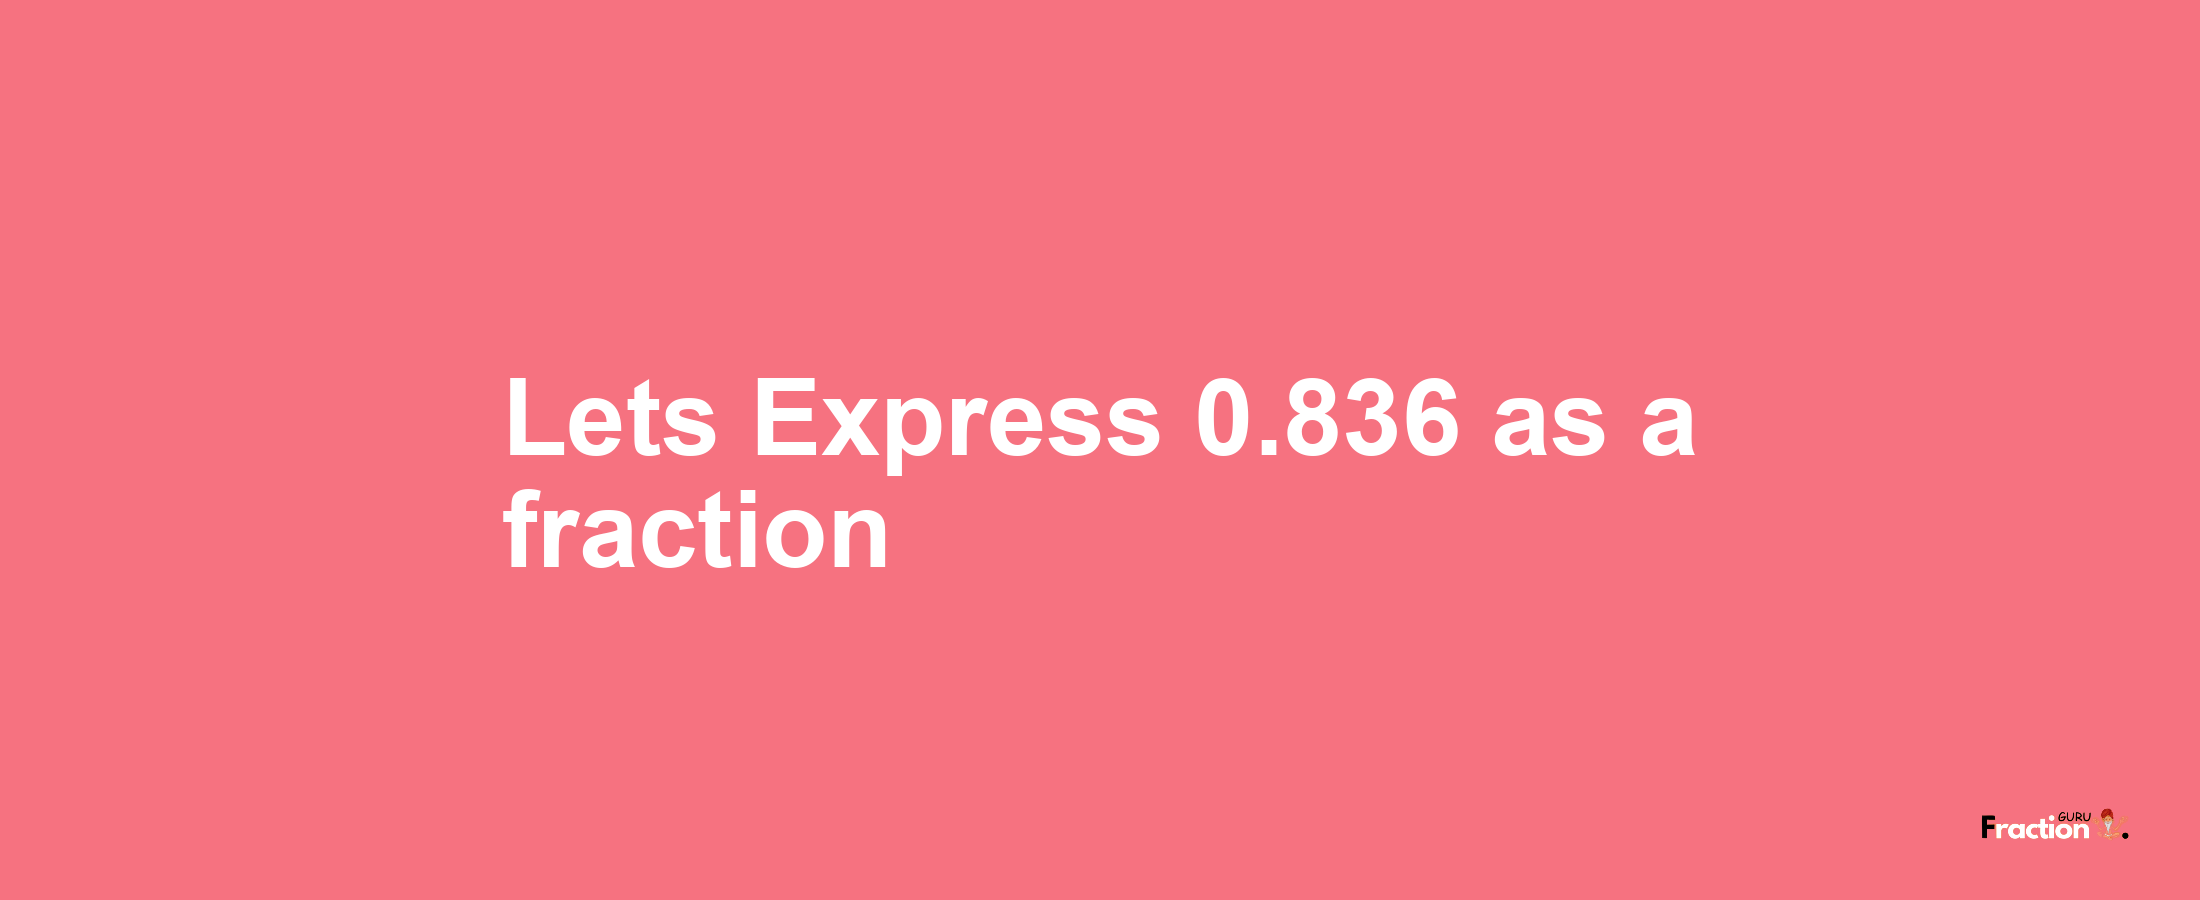 Lets Express 0.836 as afraction